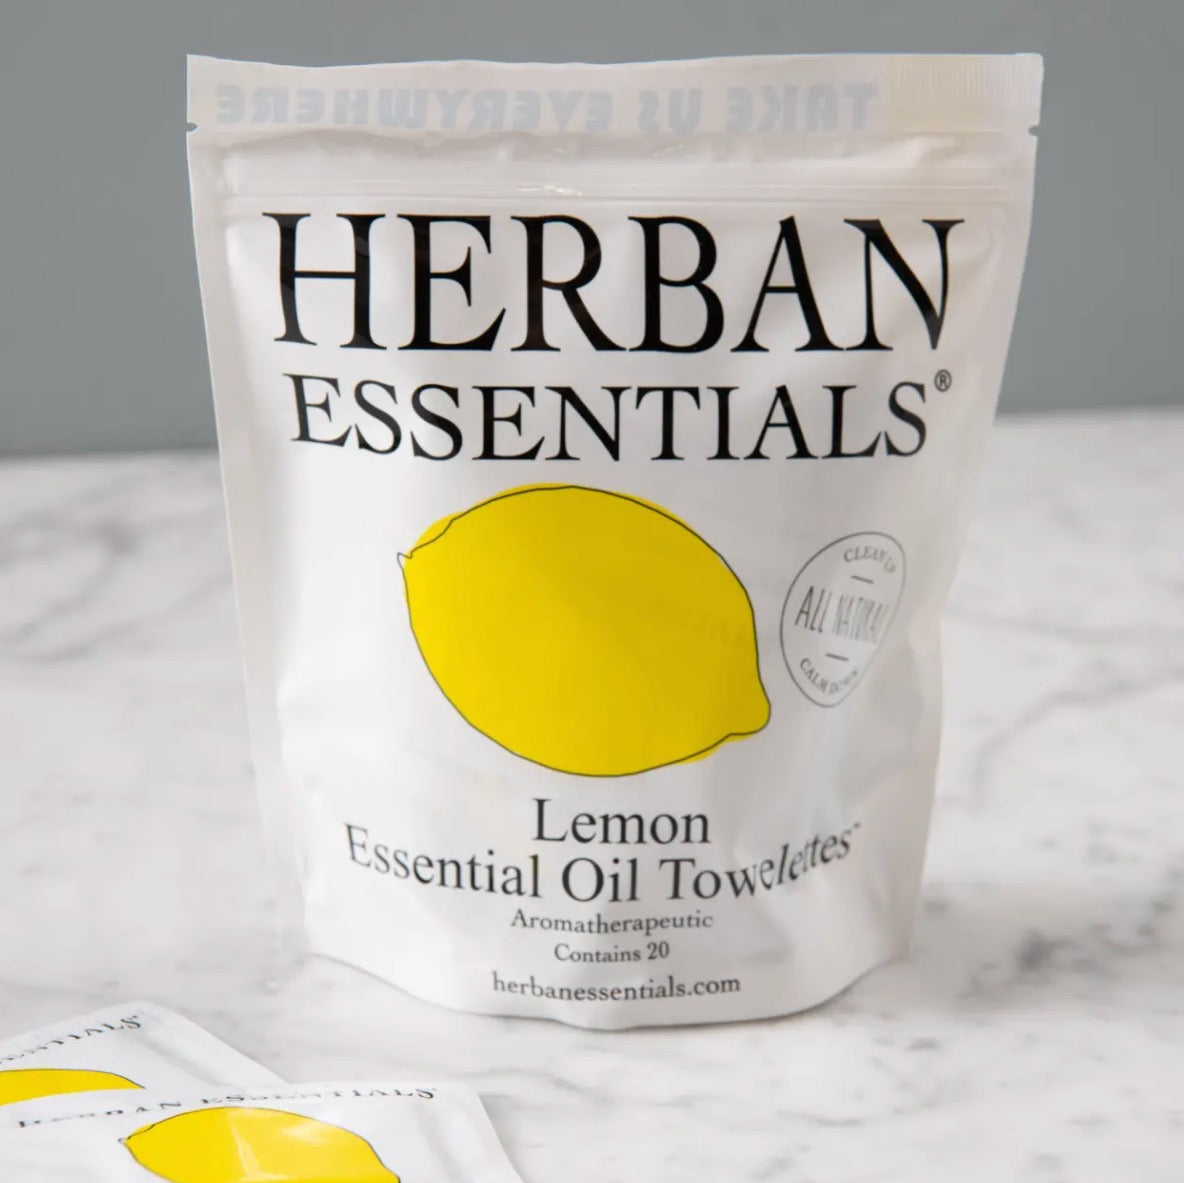 Pack of 20 Lemon Essential Oil Towelettes by Herban Essentials